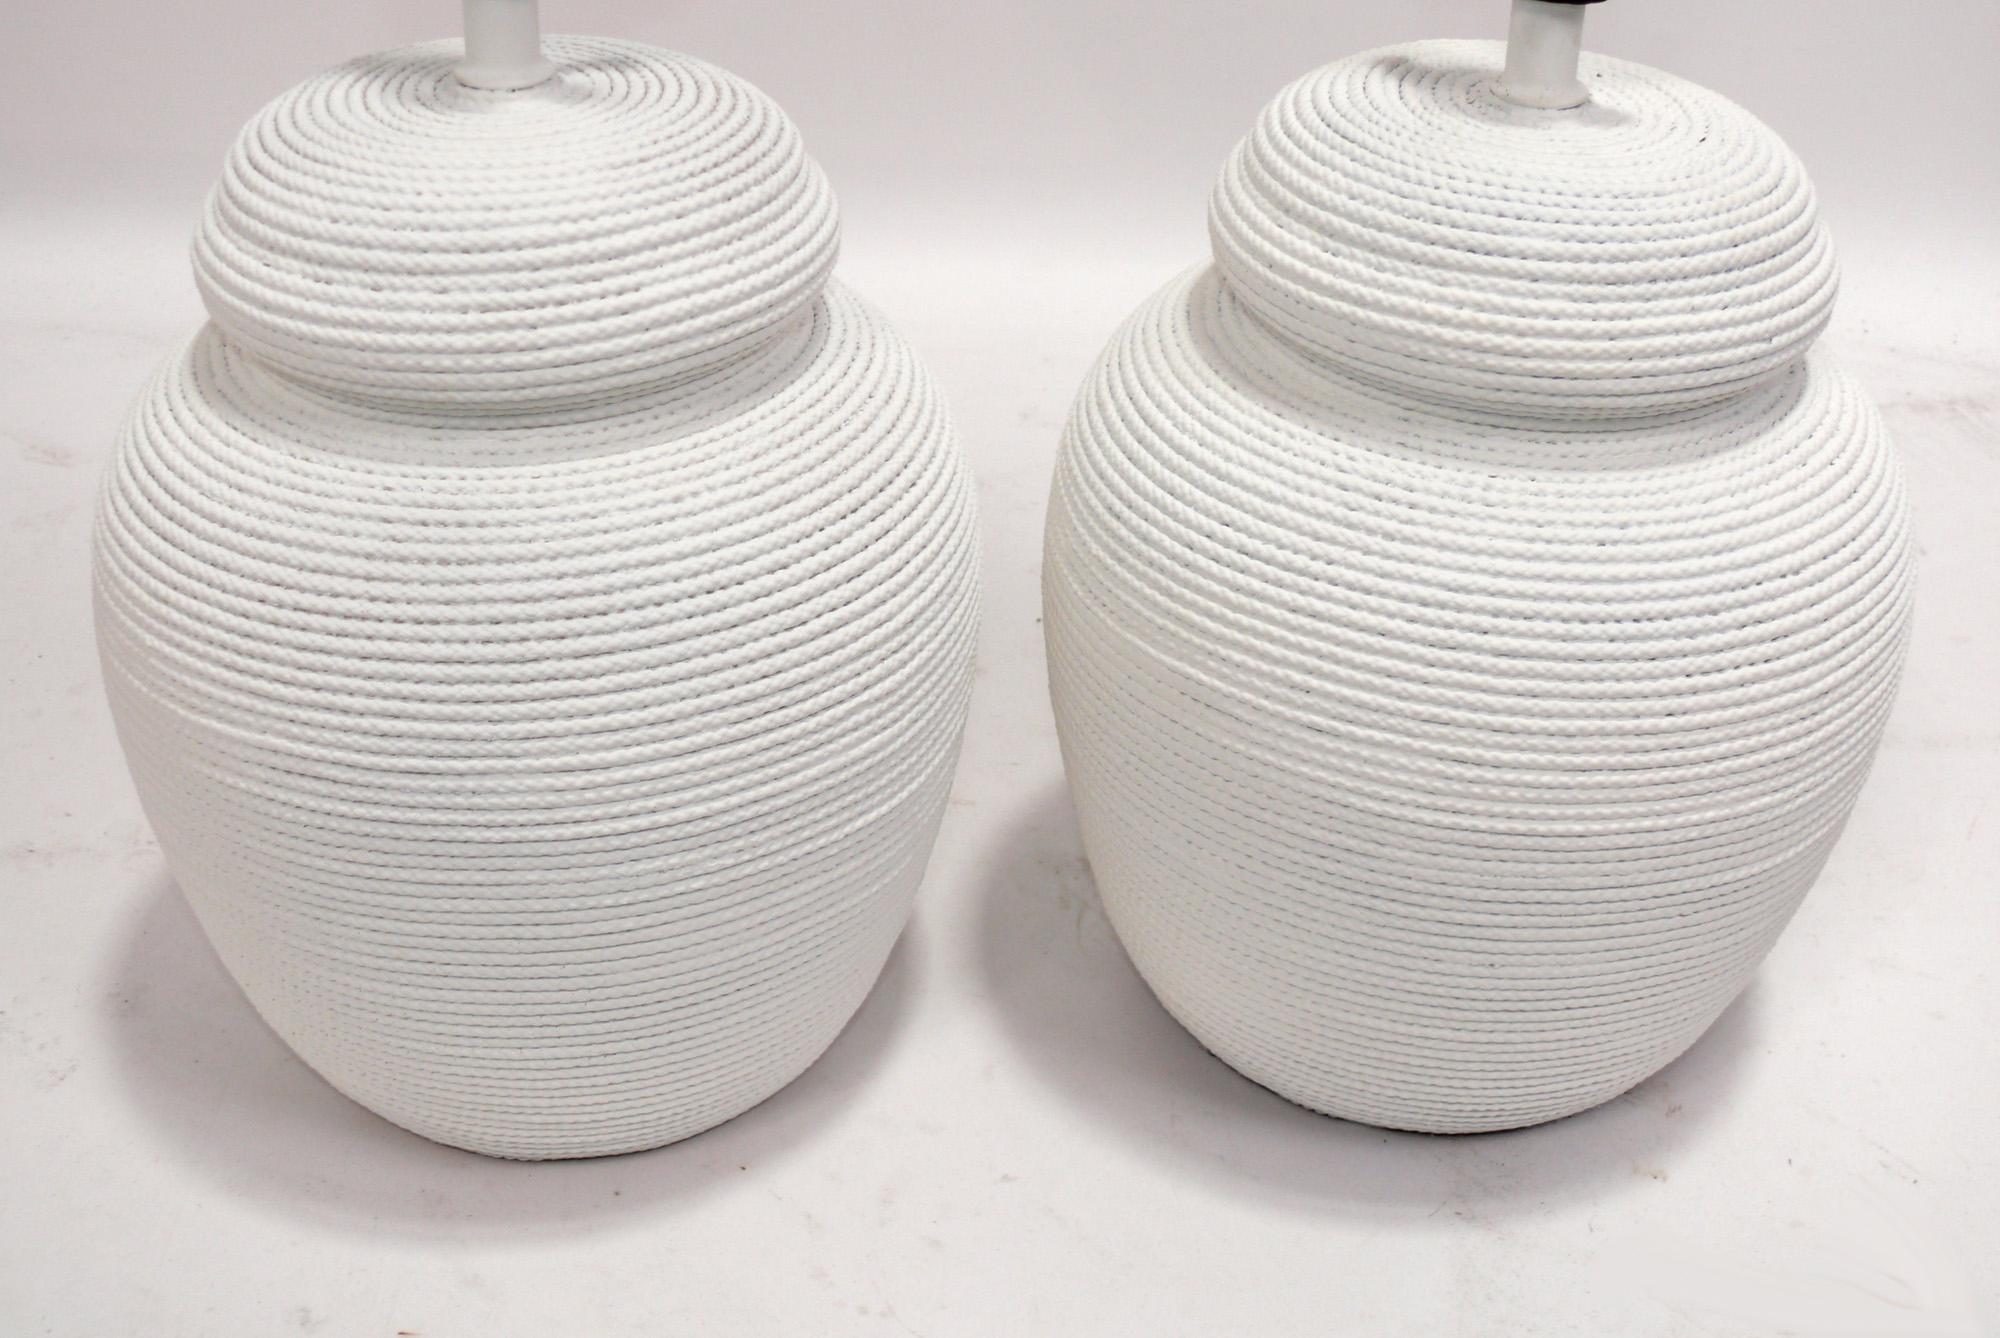 Pair of Rope Wrapped Form Ceramic Lamps, made by the S&M Lamp Company Inc., American, circa 1970s. Executed in a chalky white finish. They have been rewired and are ready to use, and the price noted includes the shades. 